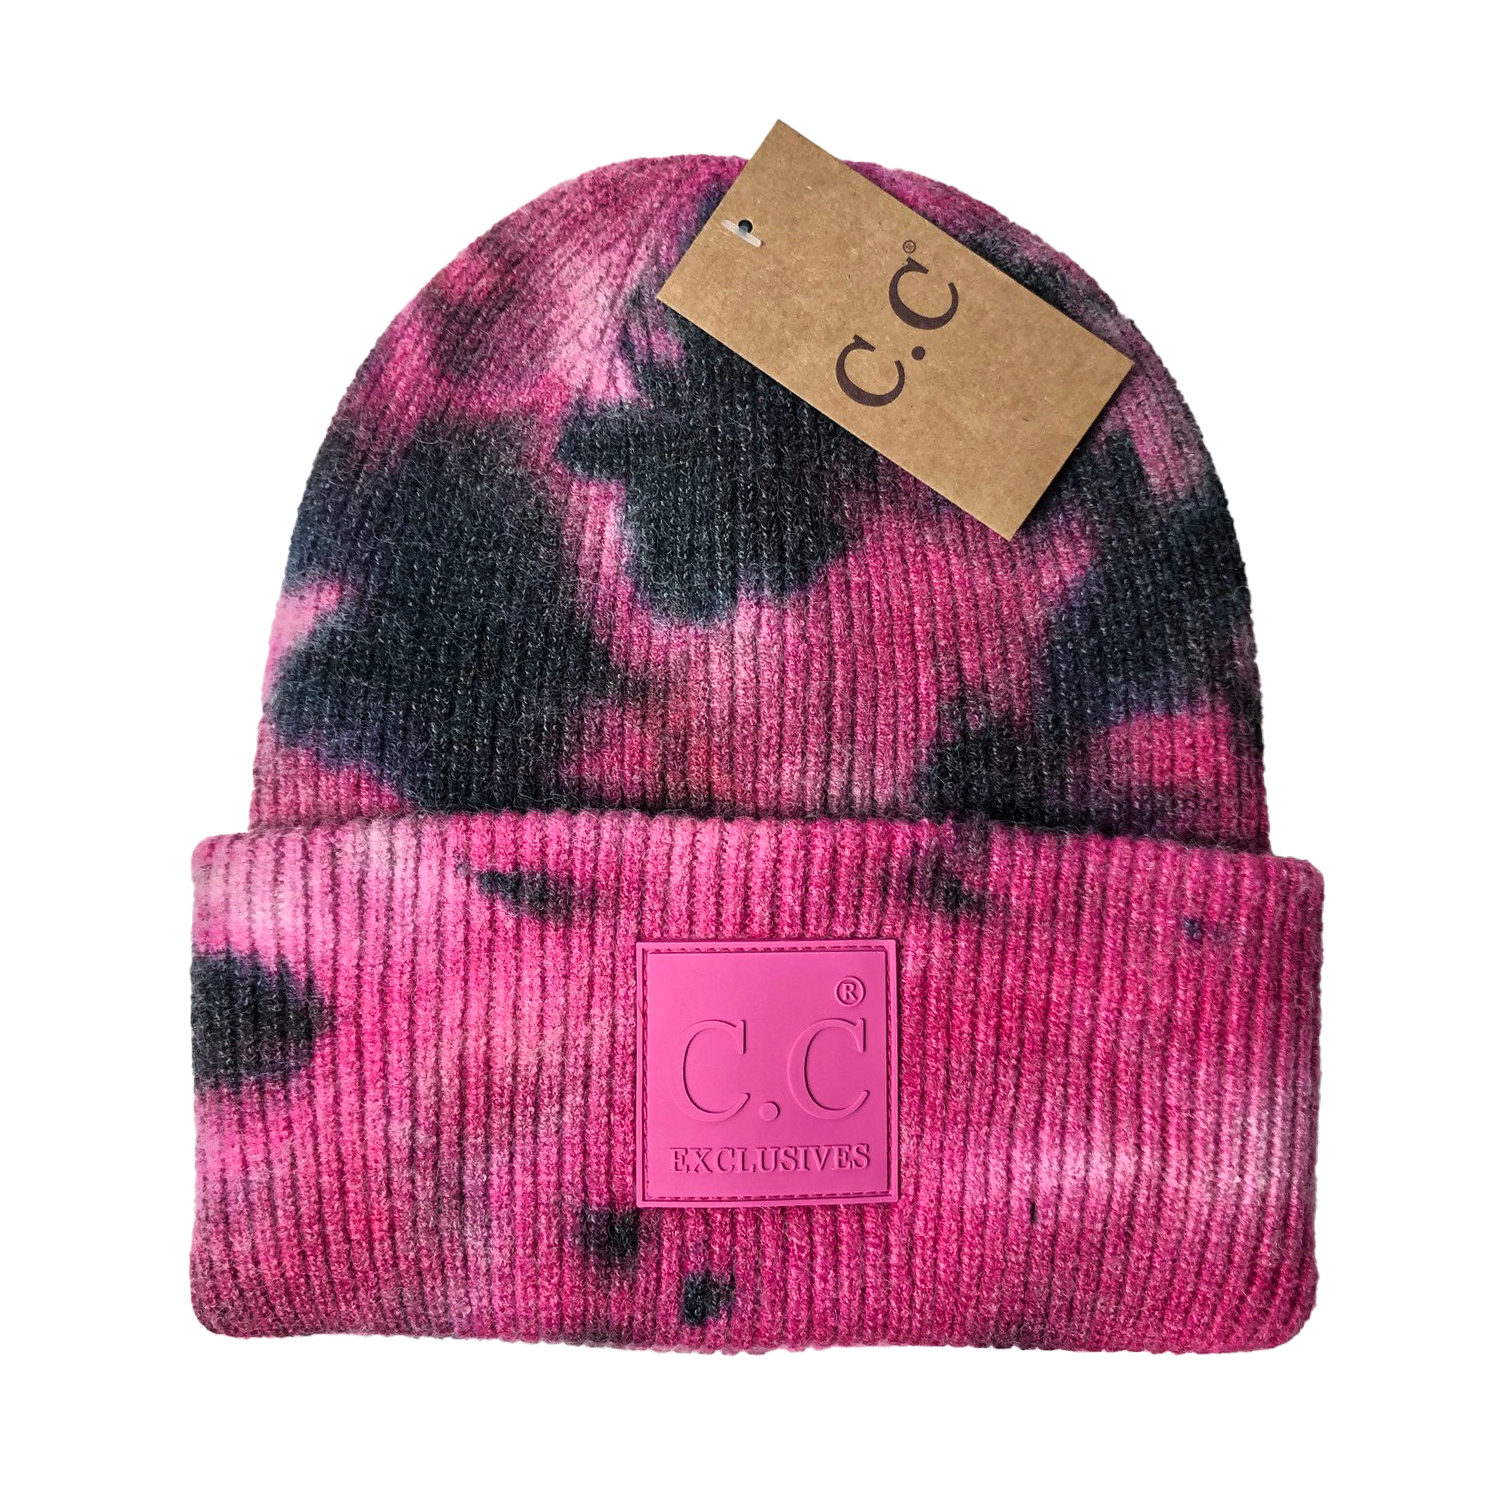 HAT-7380 Tie Dye Beanie with C.C Rubber Patch - Black/Hot Pink